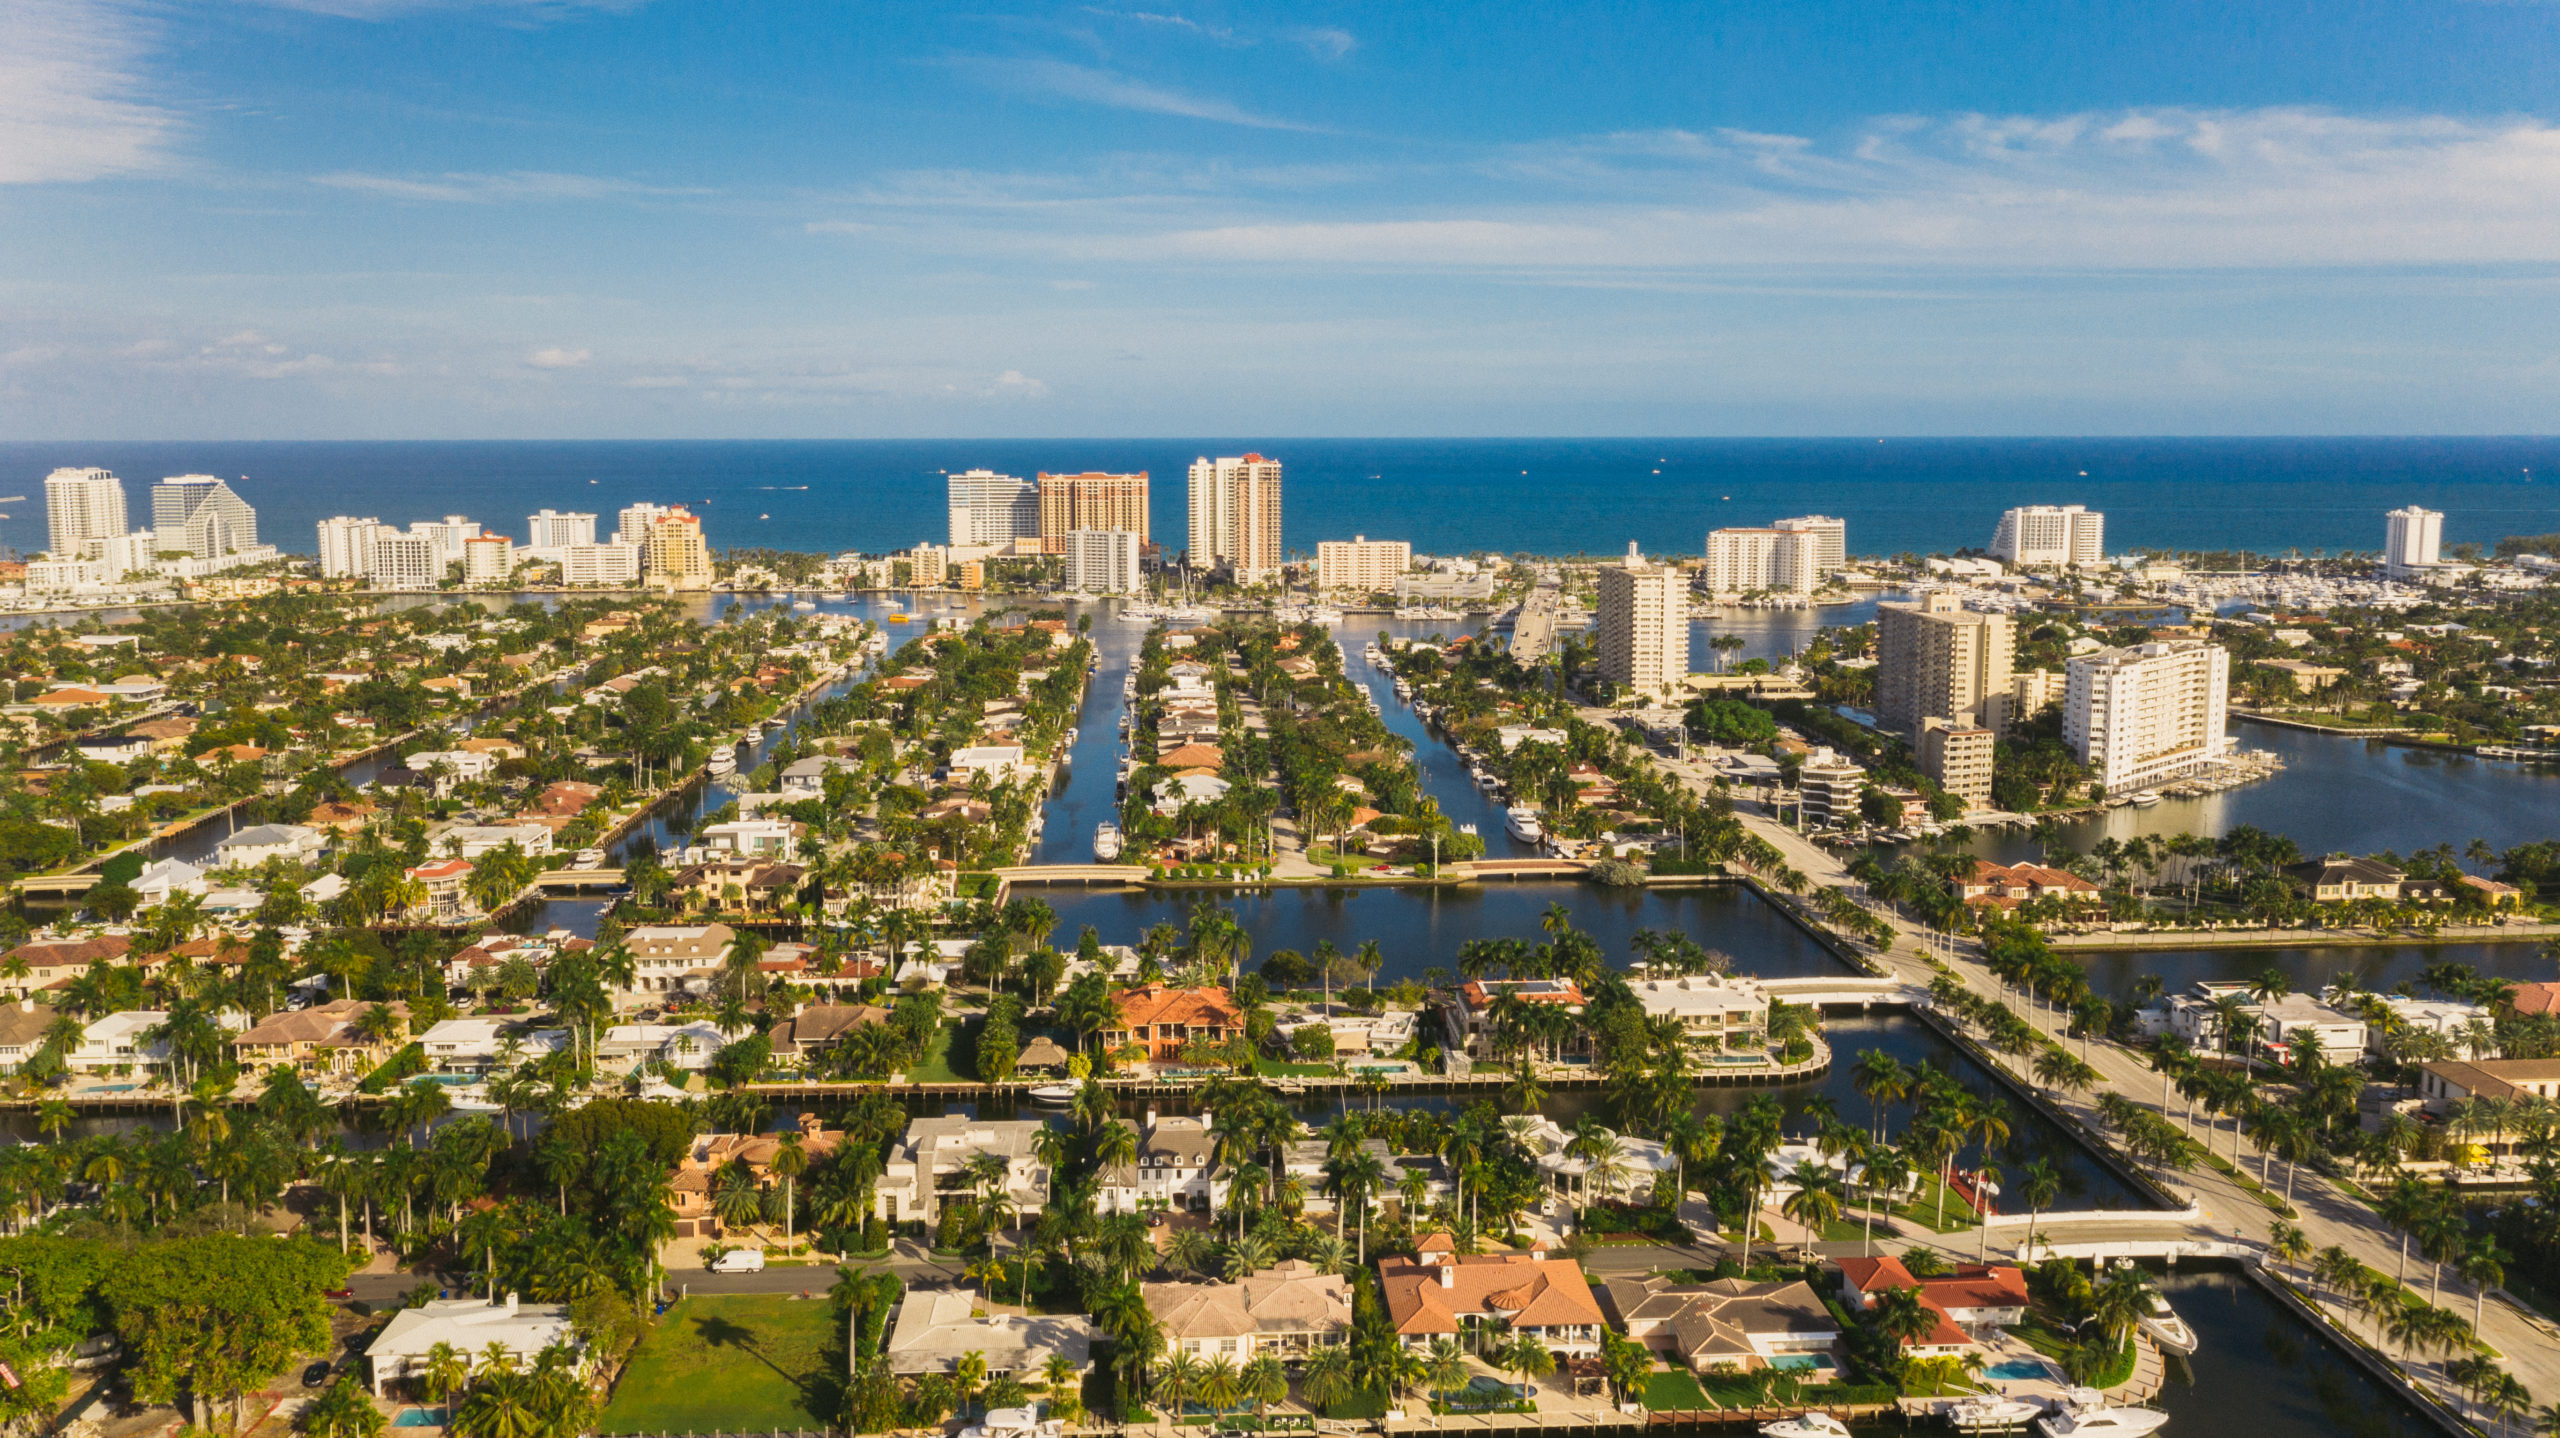 Drone Footage of city Web Design Trends for Florida Websites